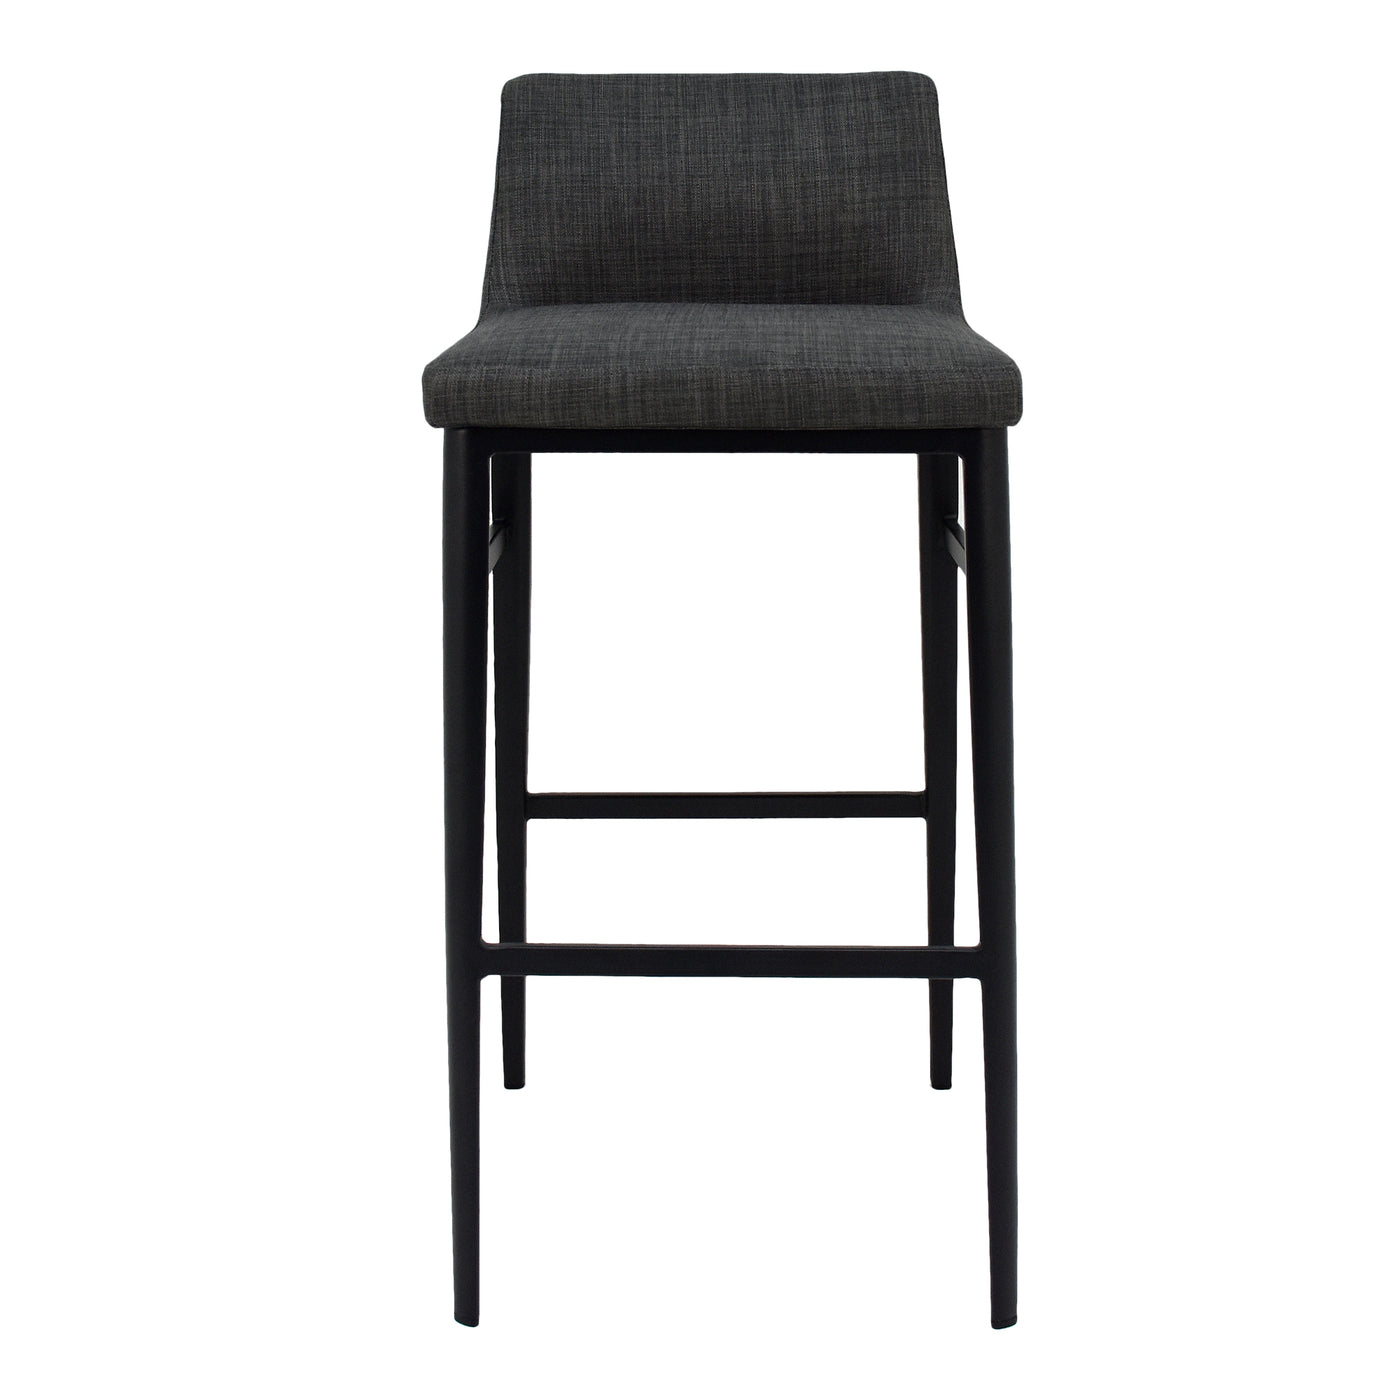 The low-backed profile of the Baron Barstool gives a stylish and compact aesthetic. The charcoal-grey mix upholstery adds ...